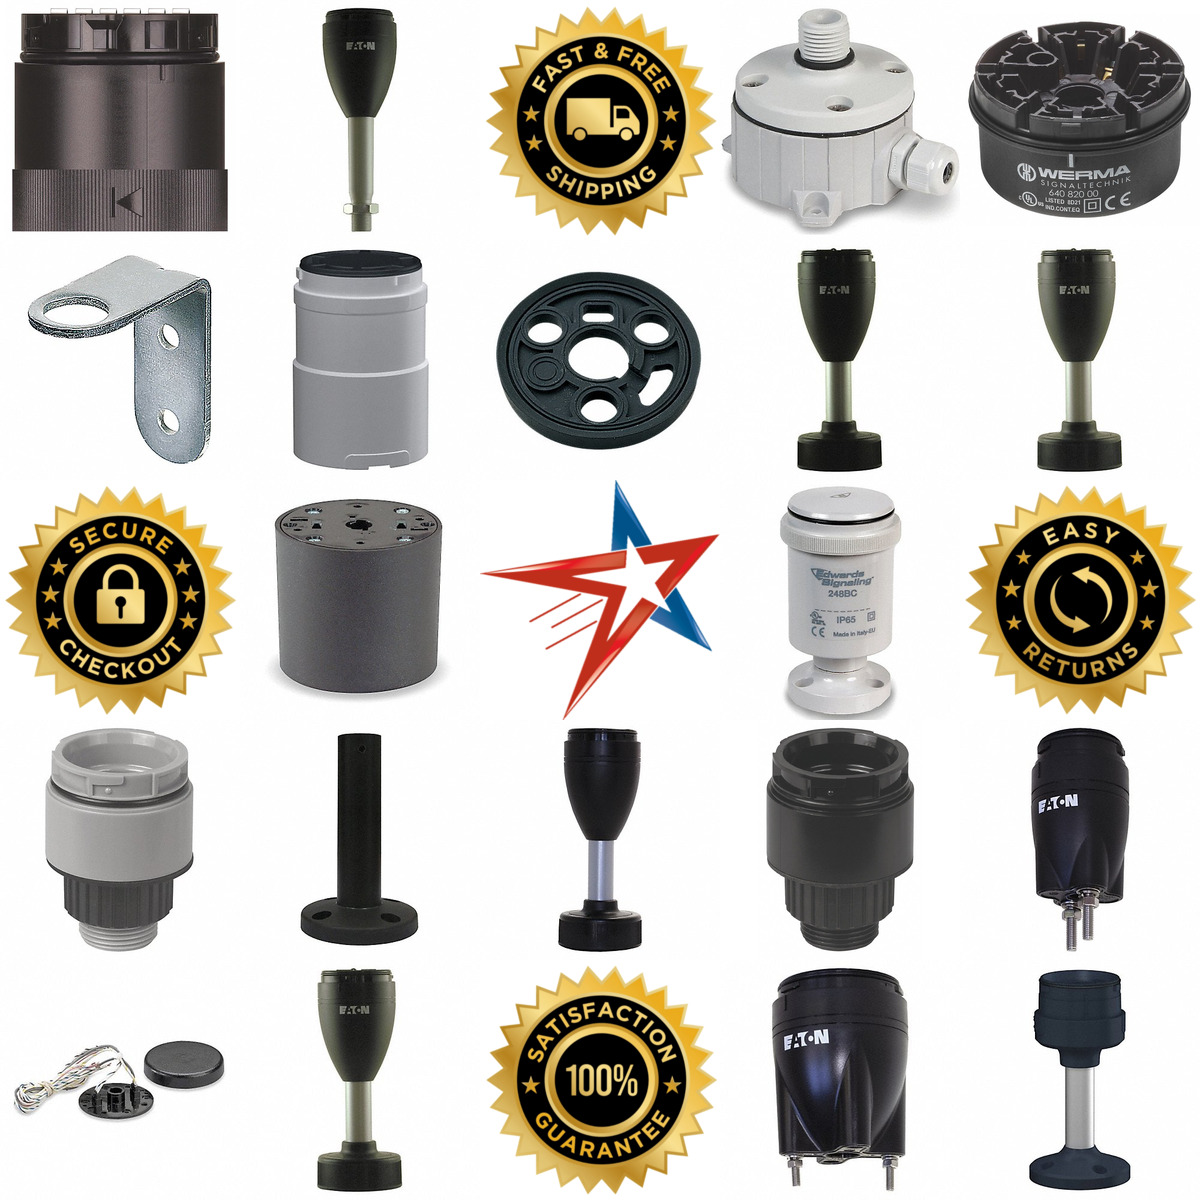 A selection of Tower Light Mounts and Bases products on GoVets